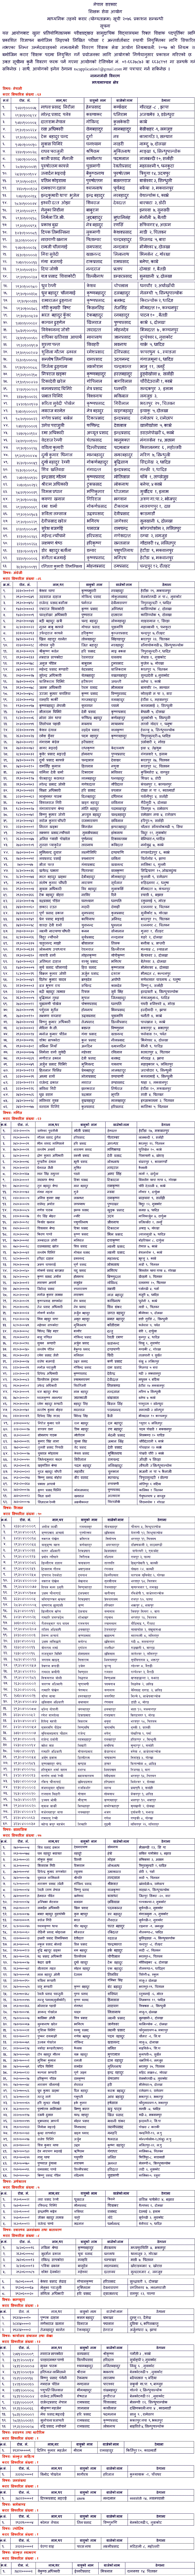 Secondary Level Central Region Eligible Candidates name list for Contract